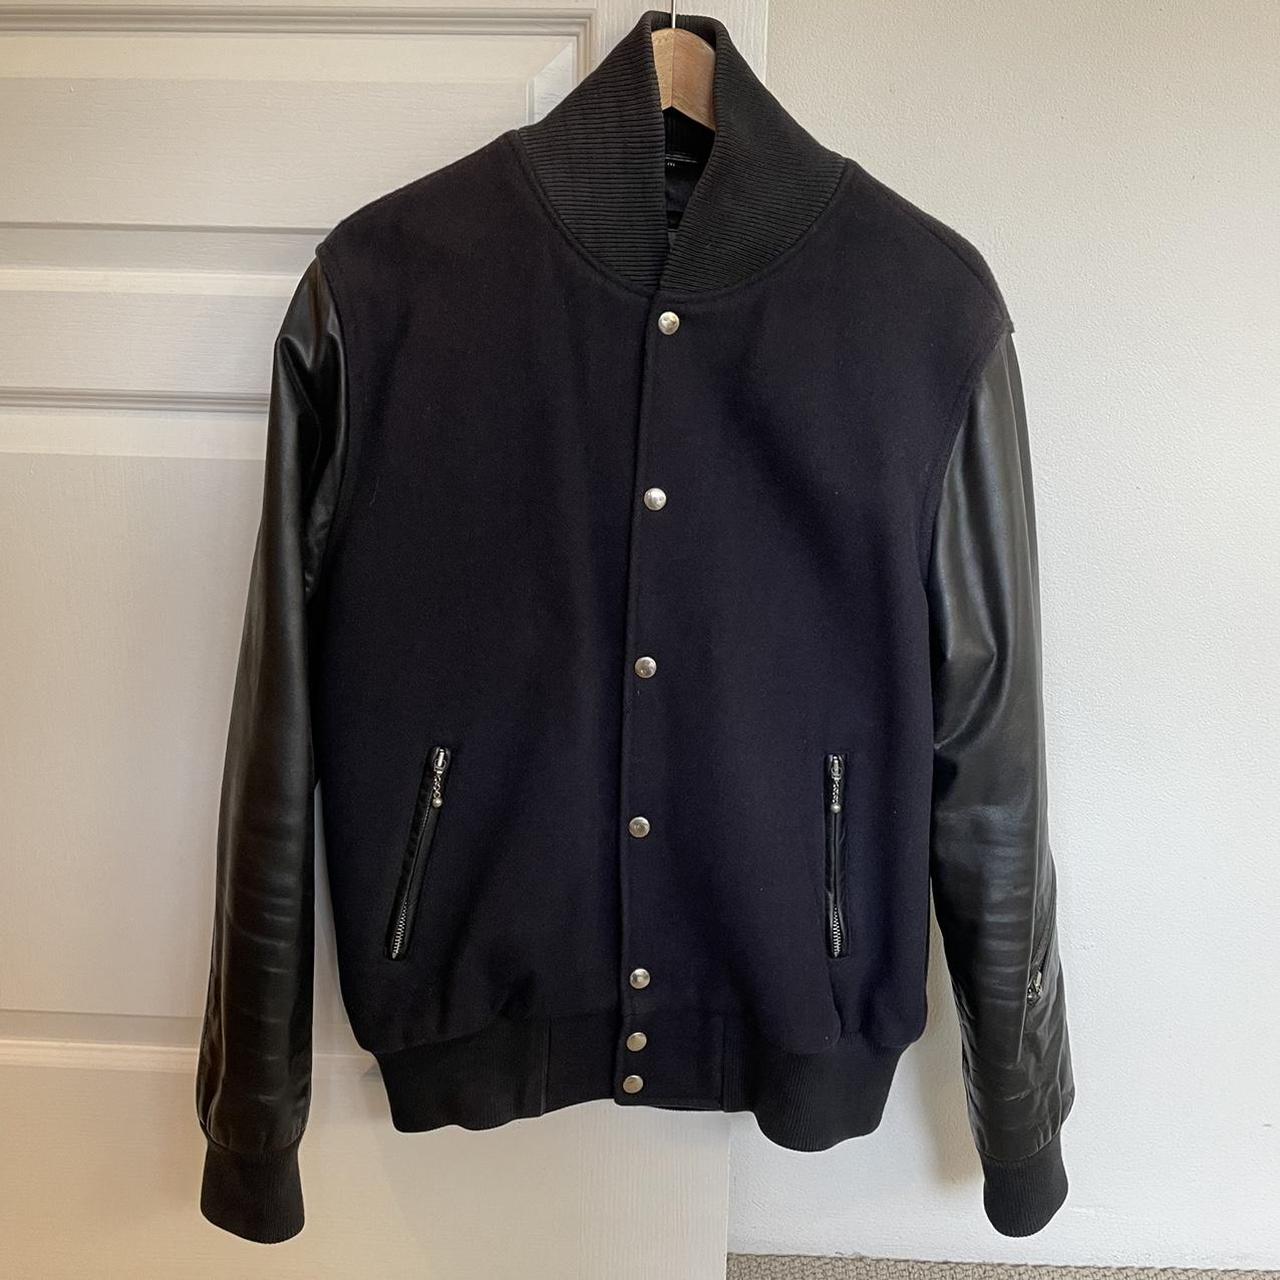 MKI Collage Varsity Jacket with wool body and... - Depop